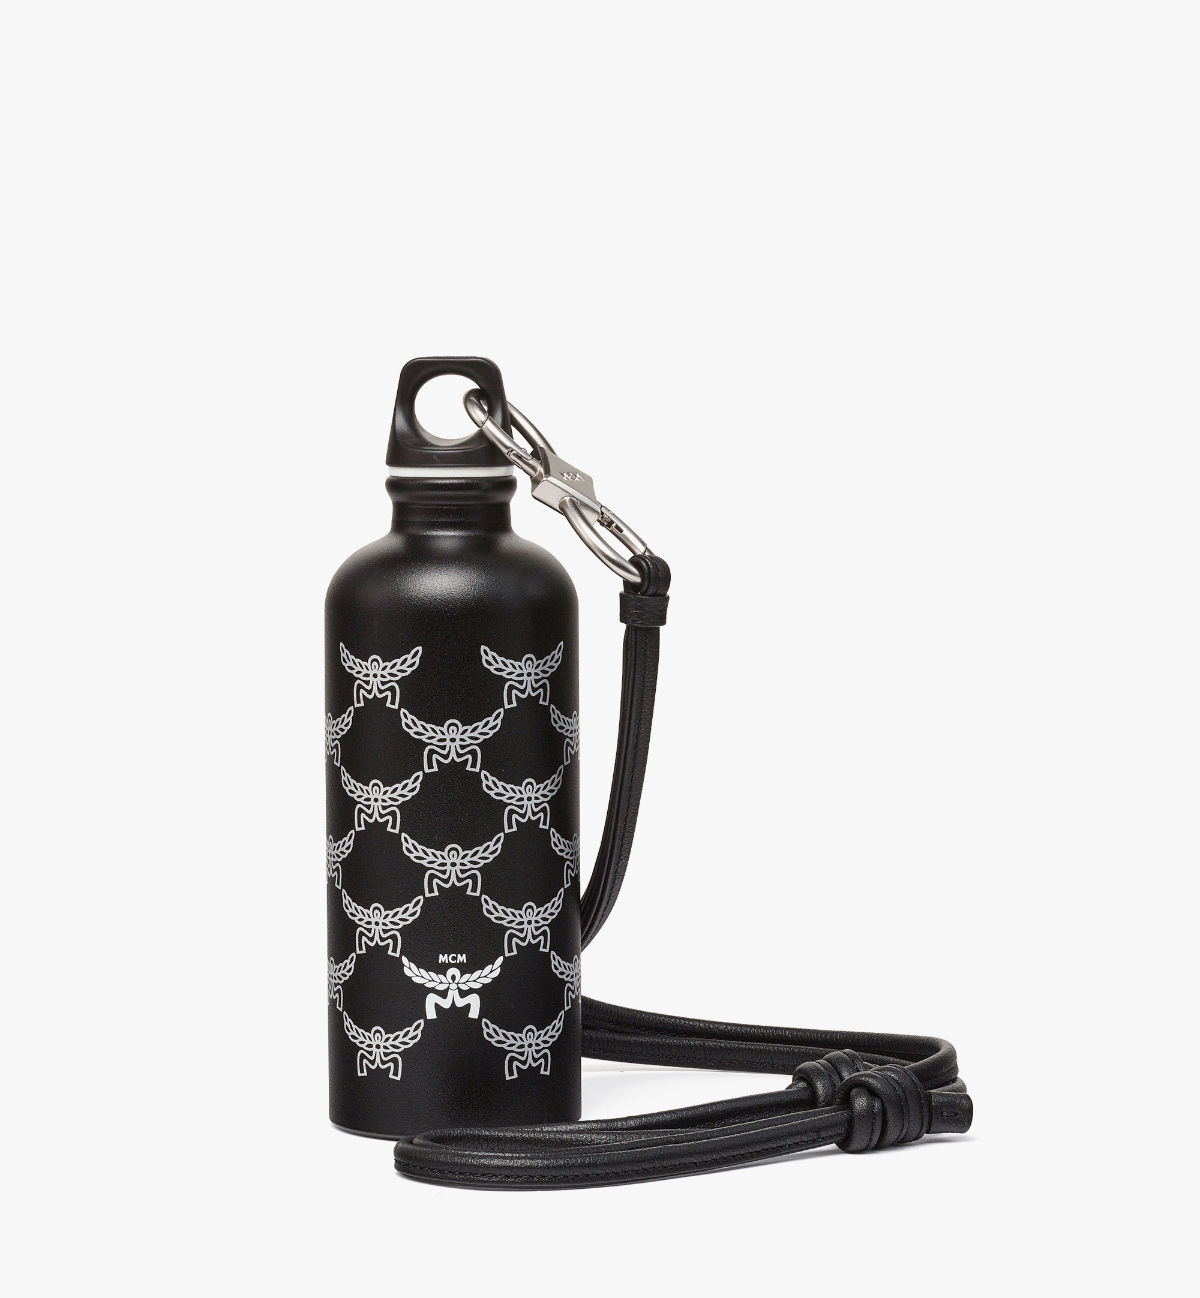 MCM Partners With Sigg With First-Time Recyclable Bottle Release